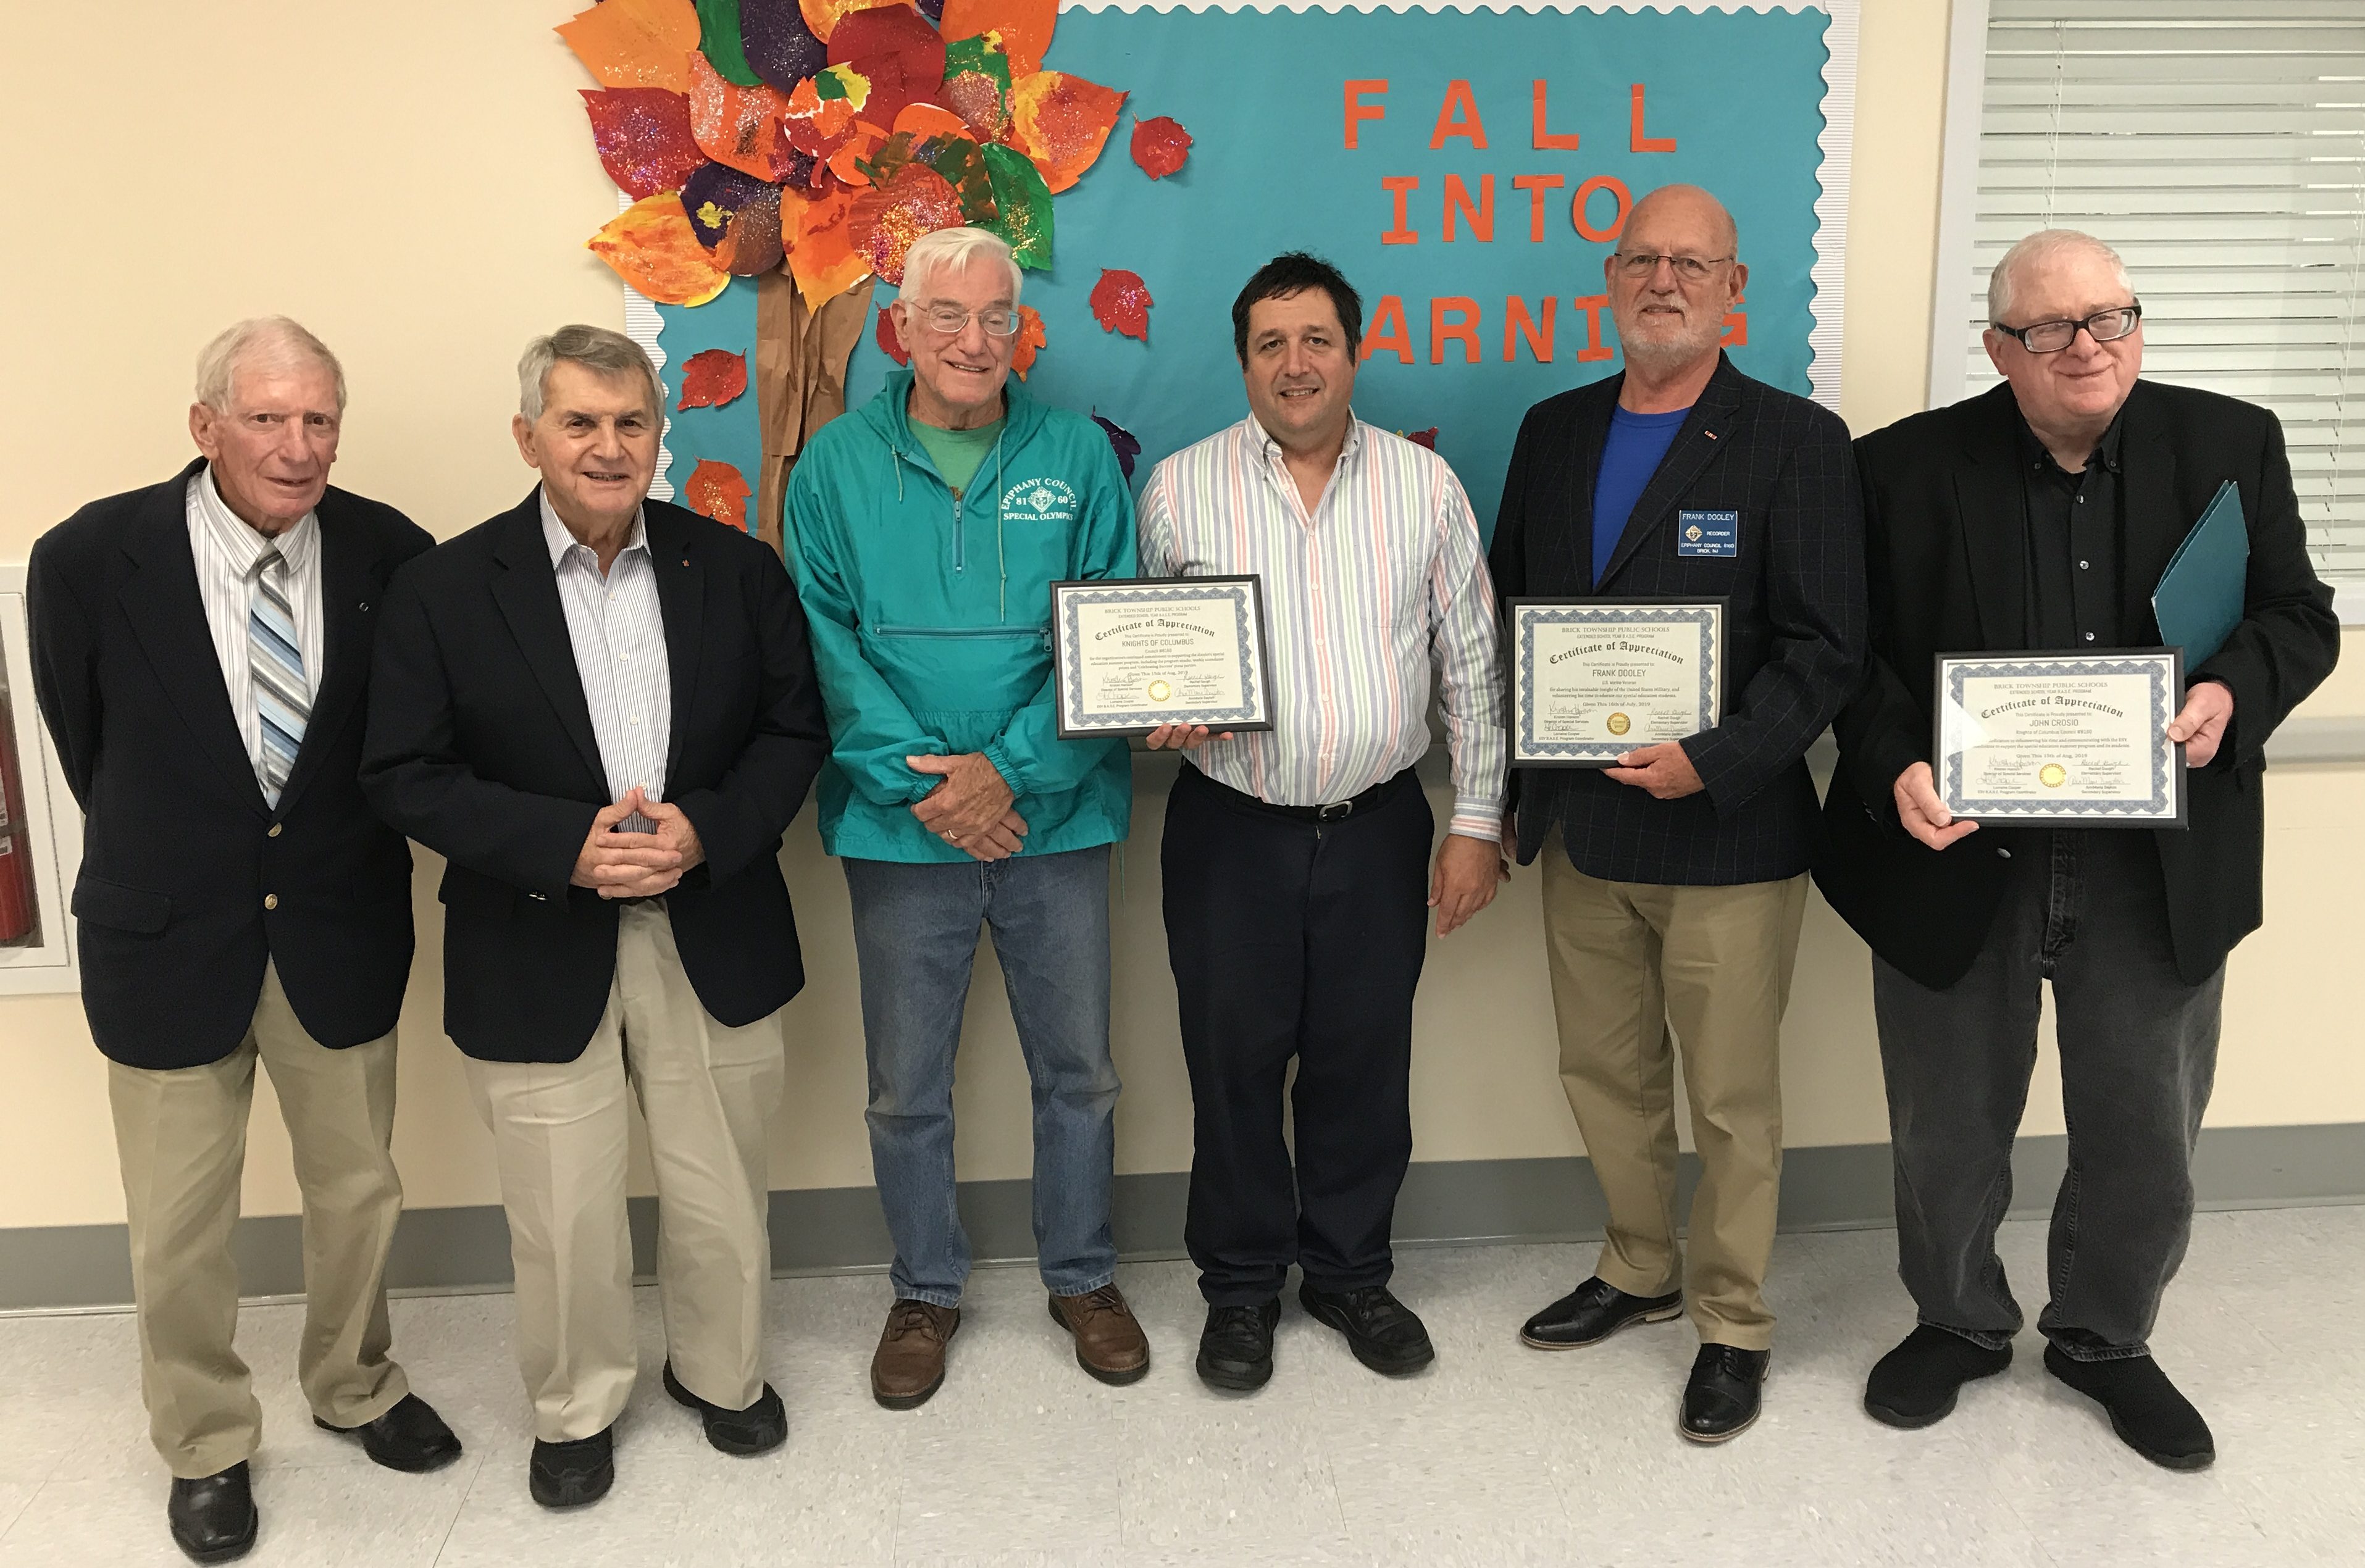 Members of Knights of Columbus Council 8160 receive an honor from the Brick Twp. Board of Education, Oct. 2019. (Photo: Daniel Nee)